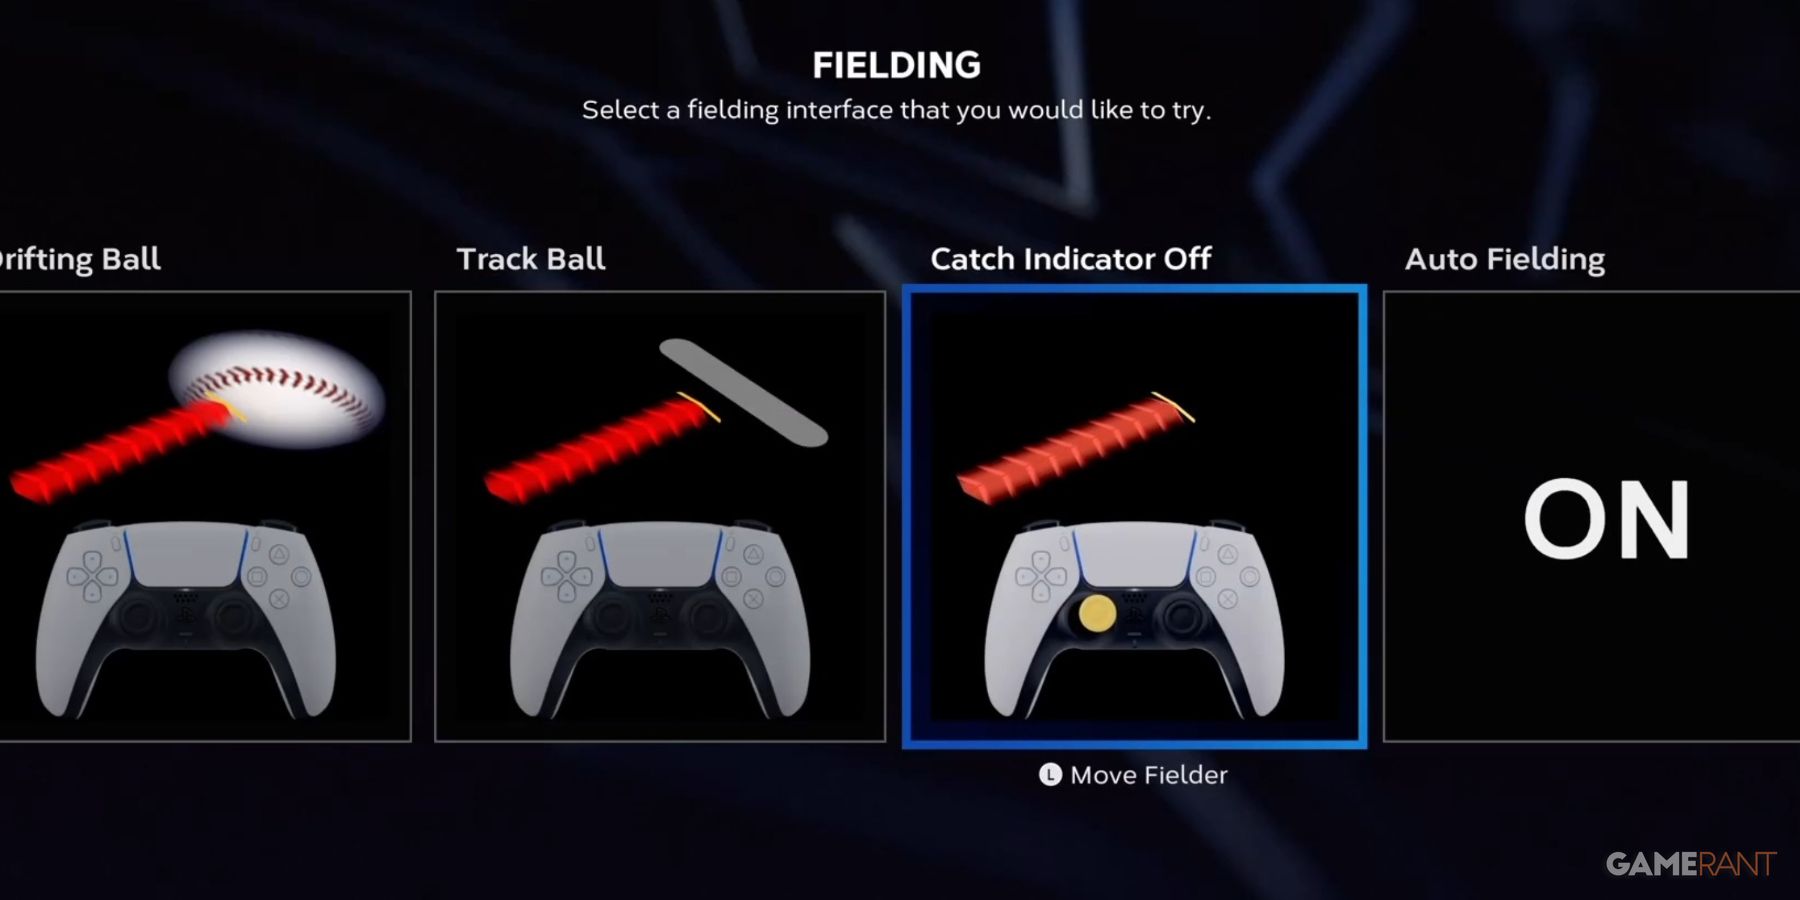 MLB The Show 23 Catch Indicator Off Fielding Setting